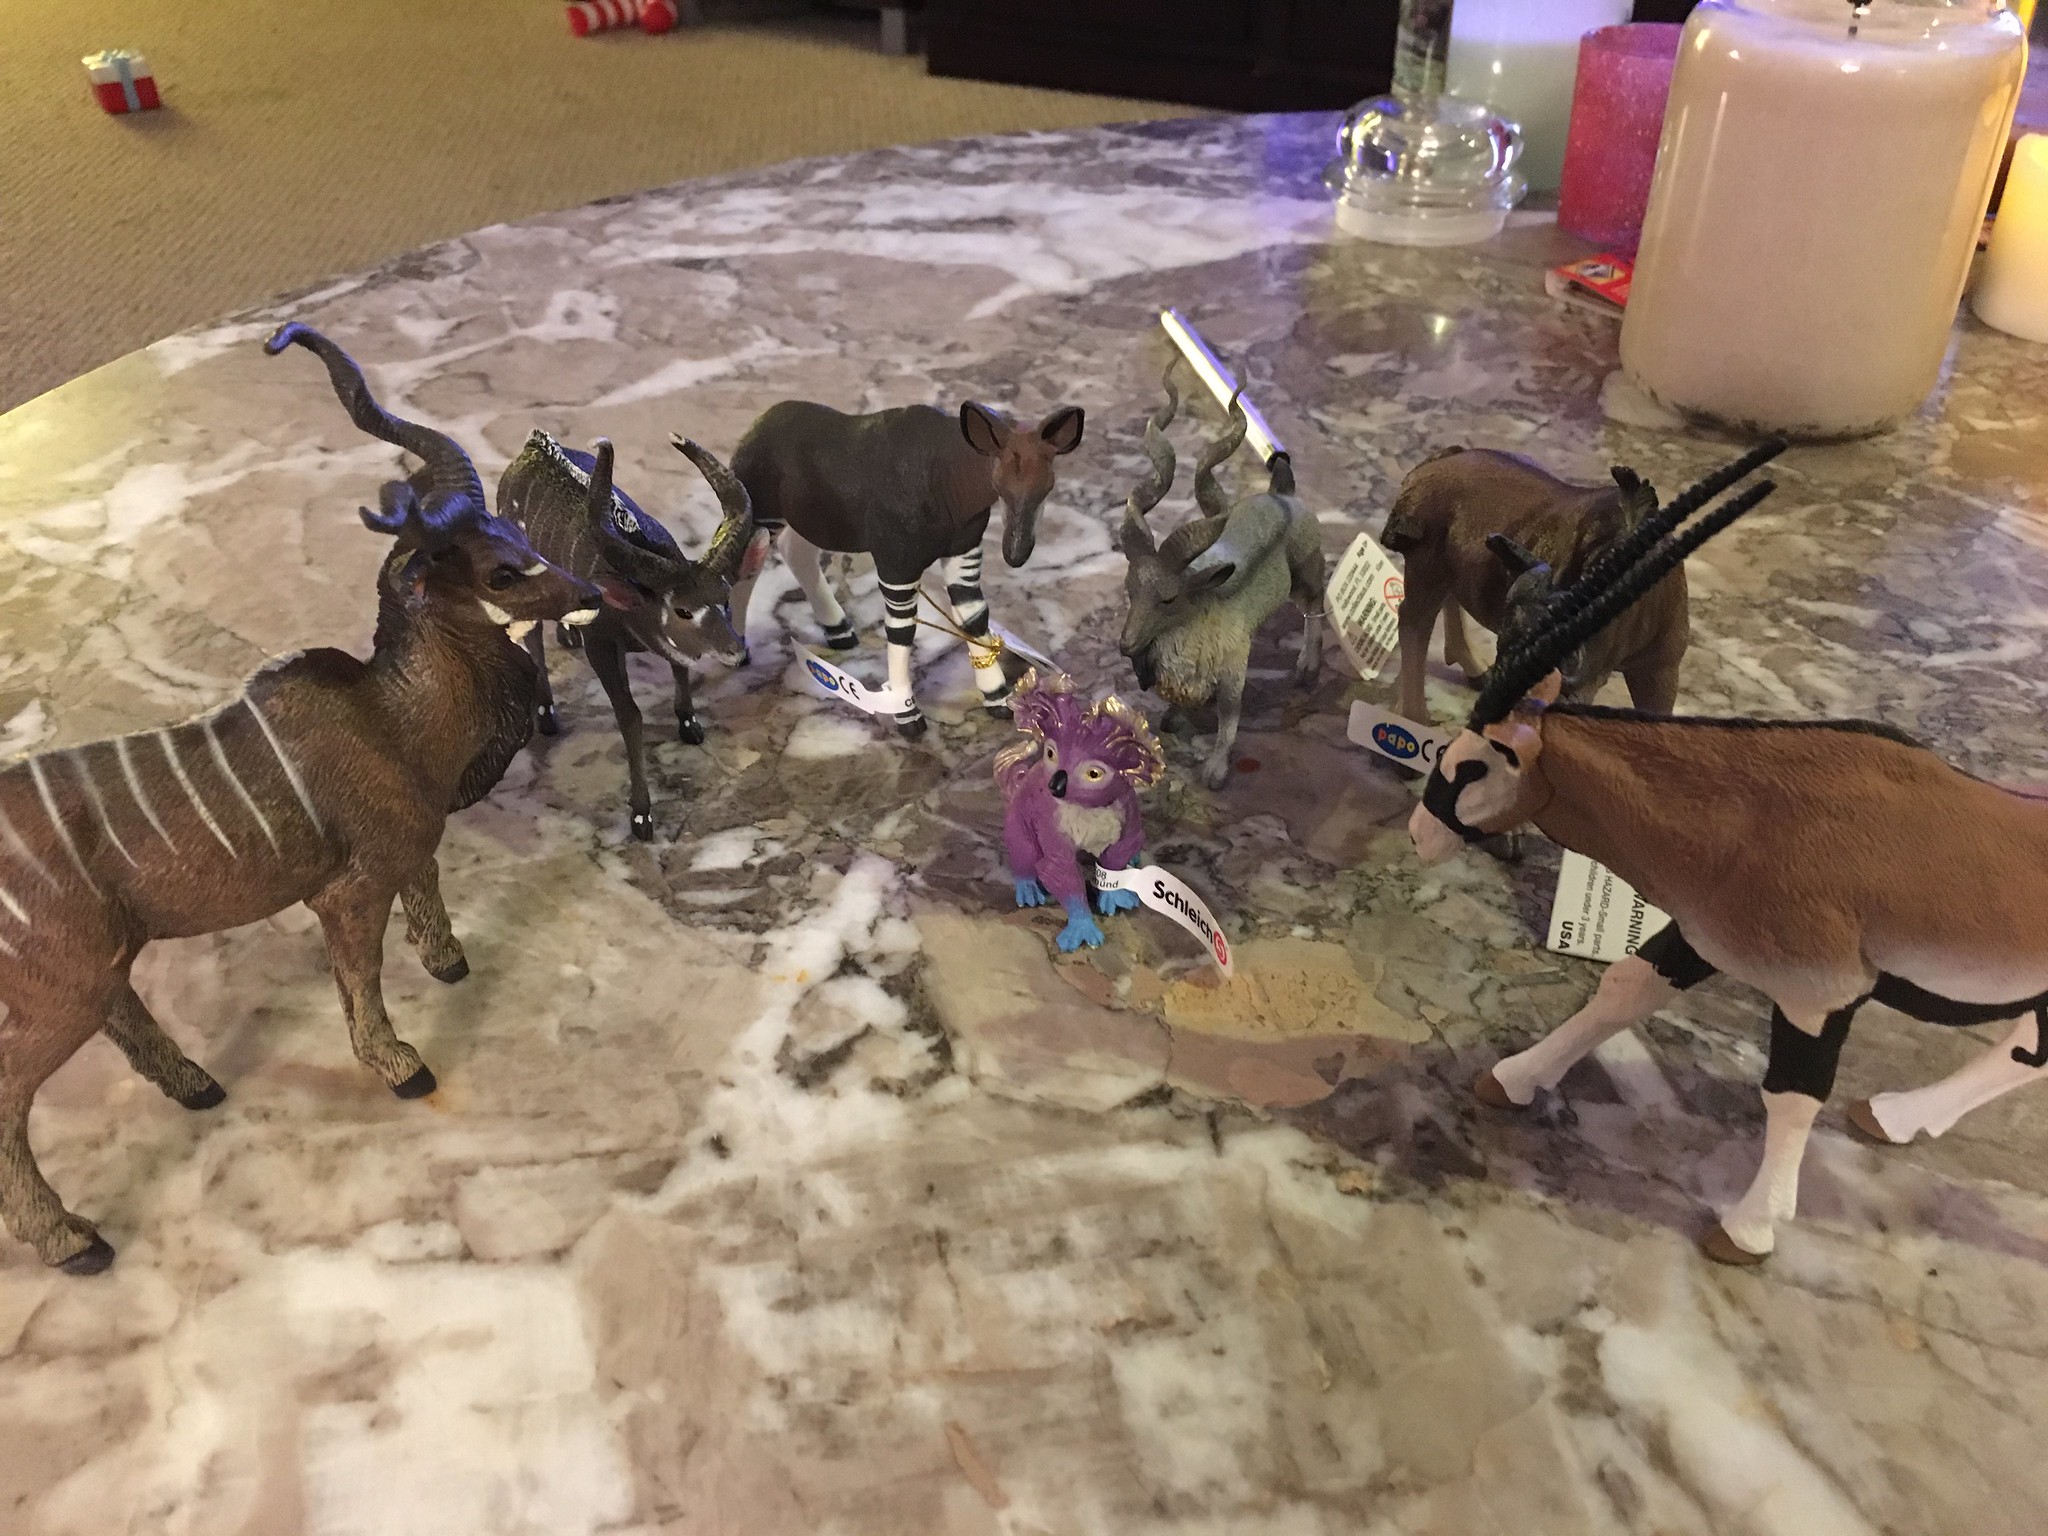 Week 2 of recovery, Allison's animals are getting restless